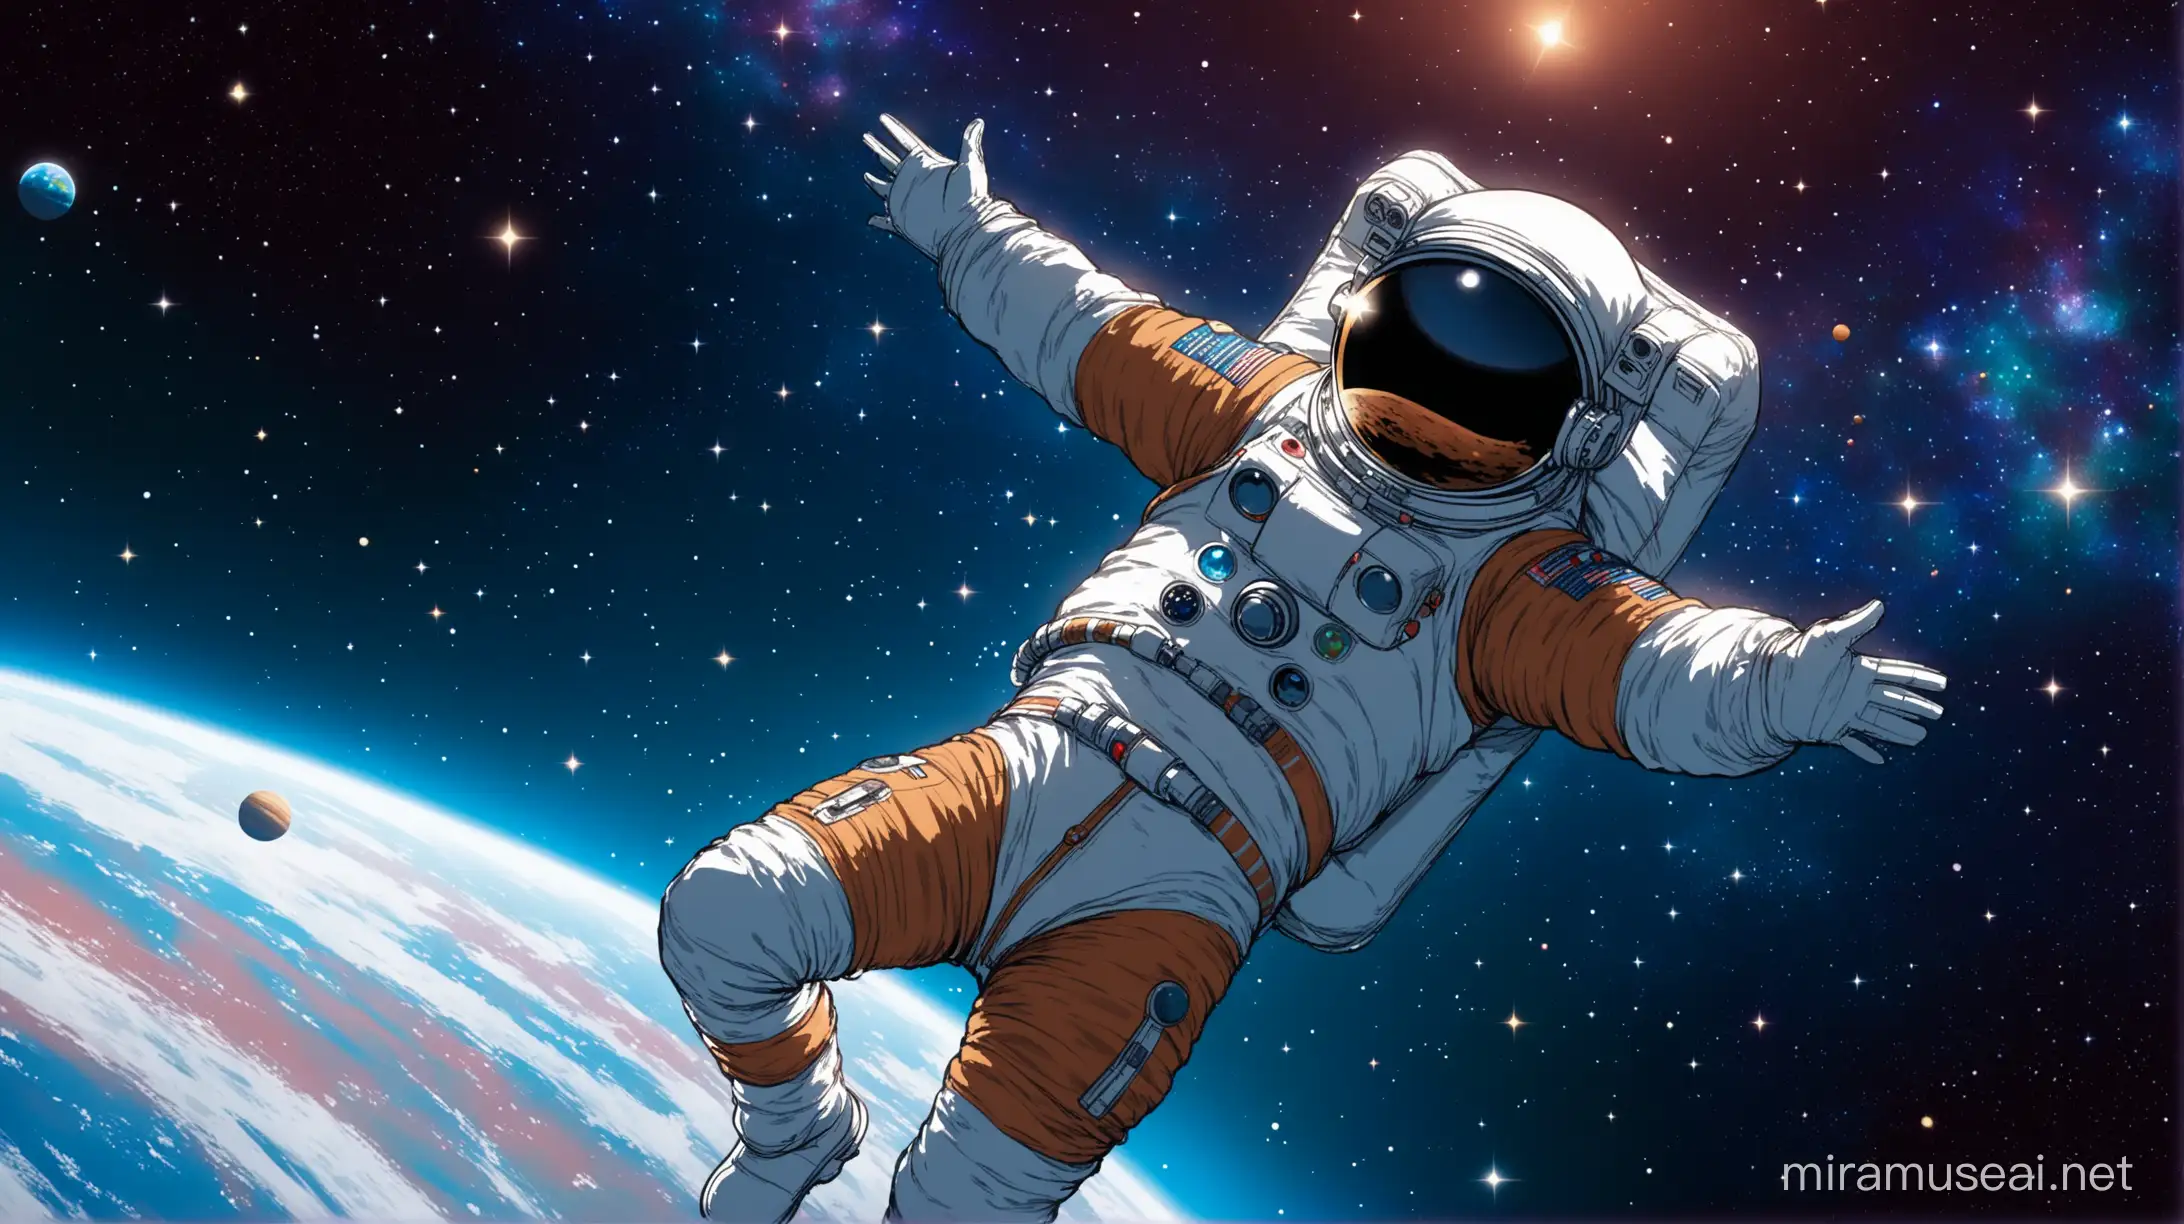 cover of a music video, a man in a cosmonaft costume flies in space among the stars and planets